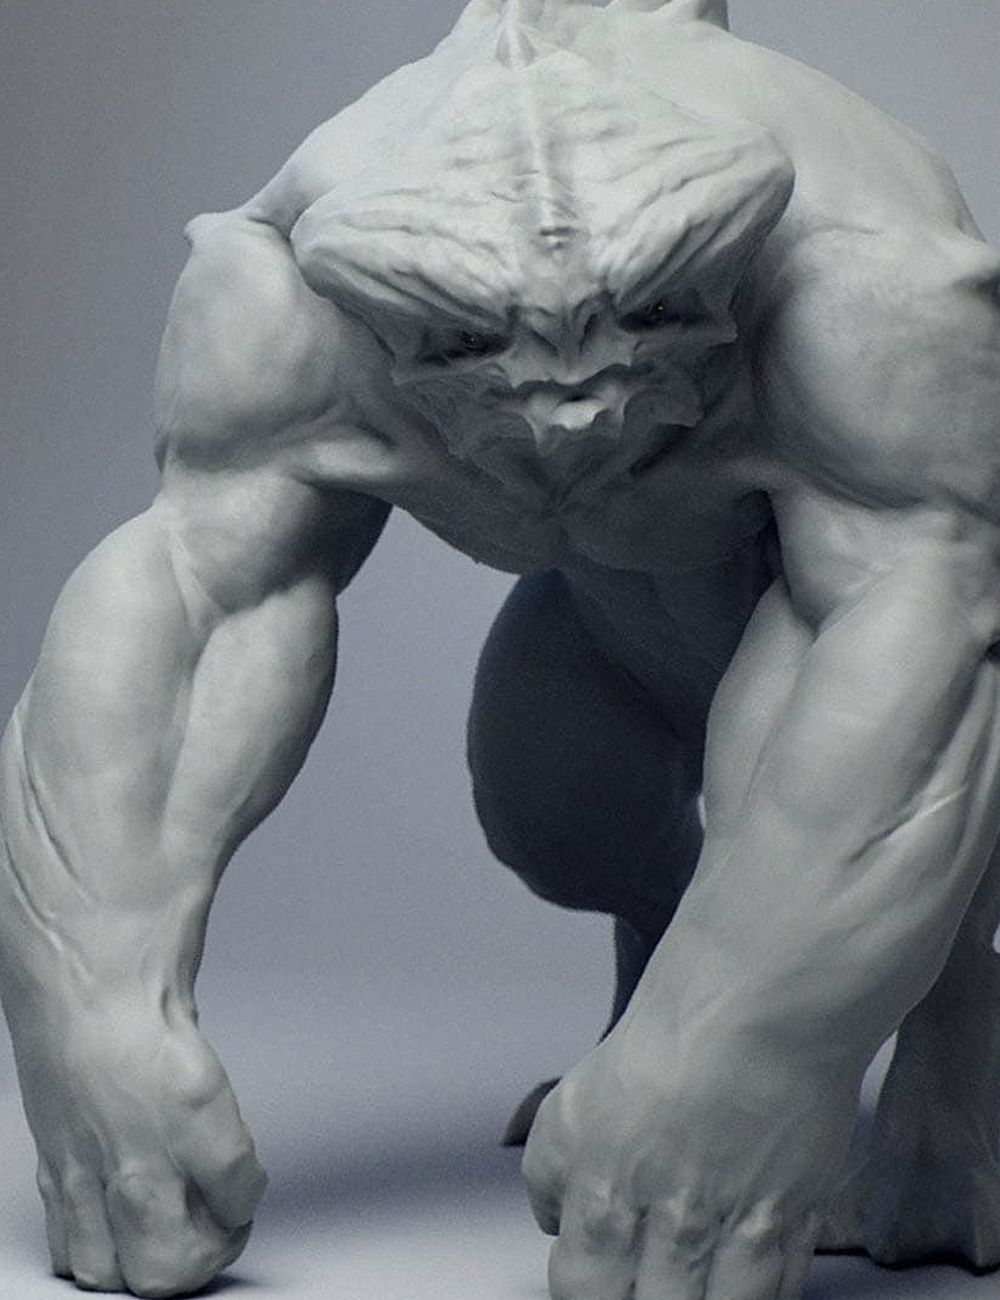 flippednormals creature concepting in zbrush and modo